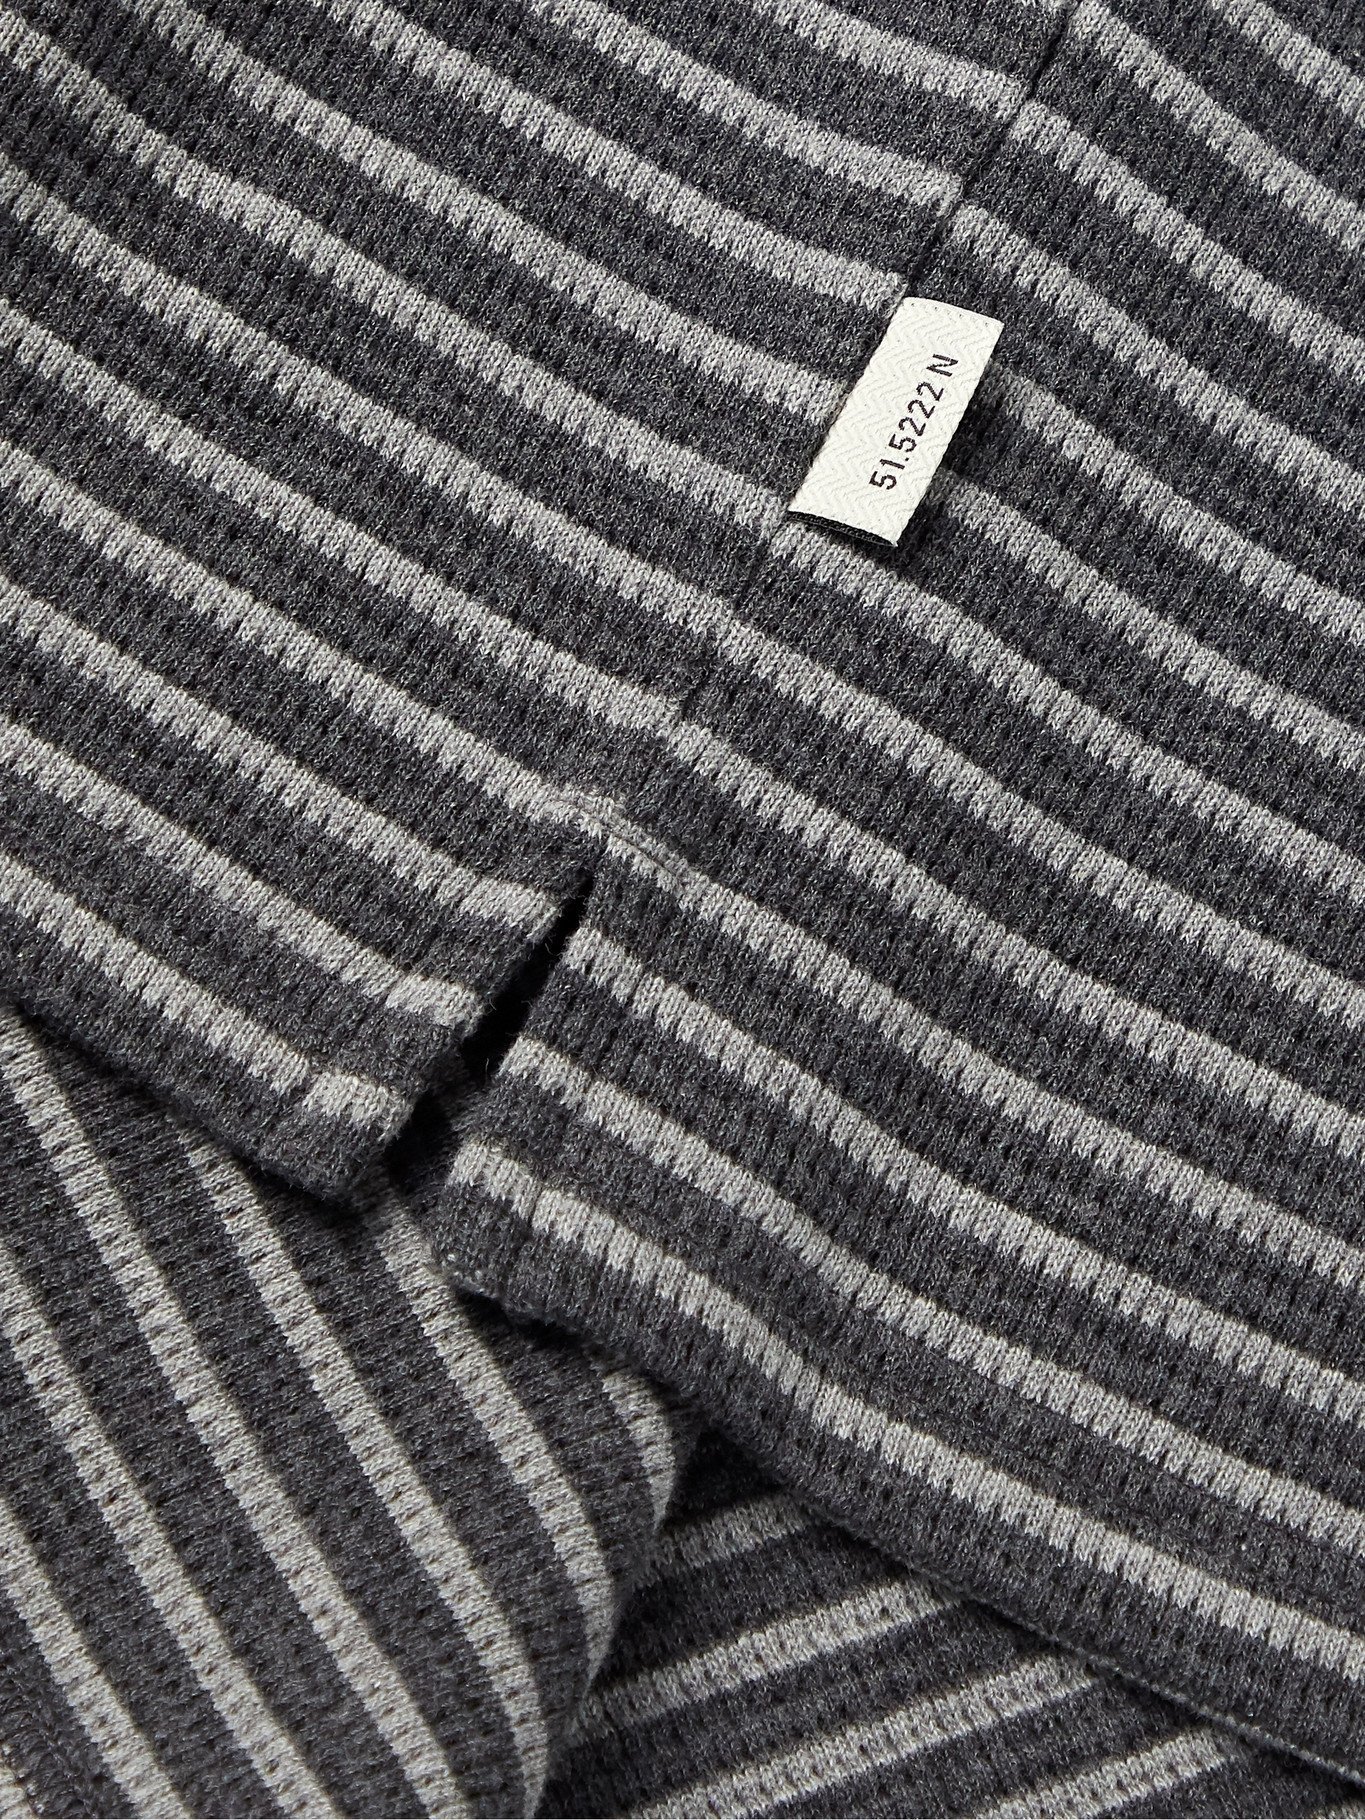 OLIVER SPENCER - Striped Waffle-Knit Organic Cotton-Jersey Sweater - Gray